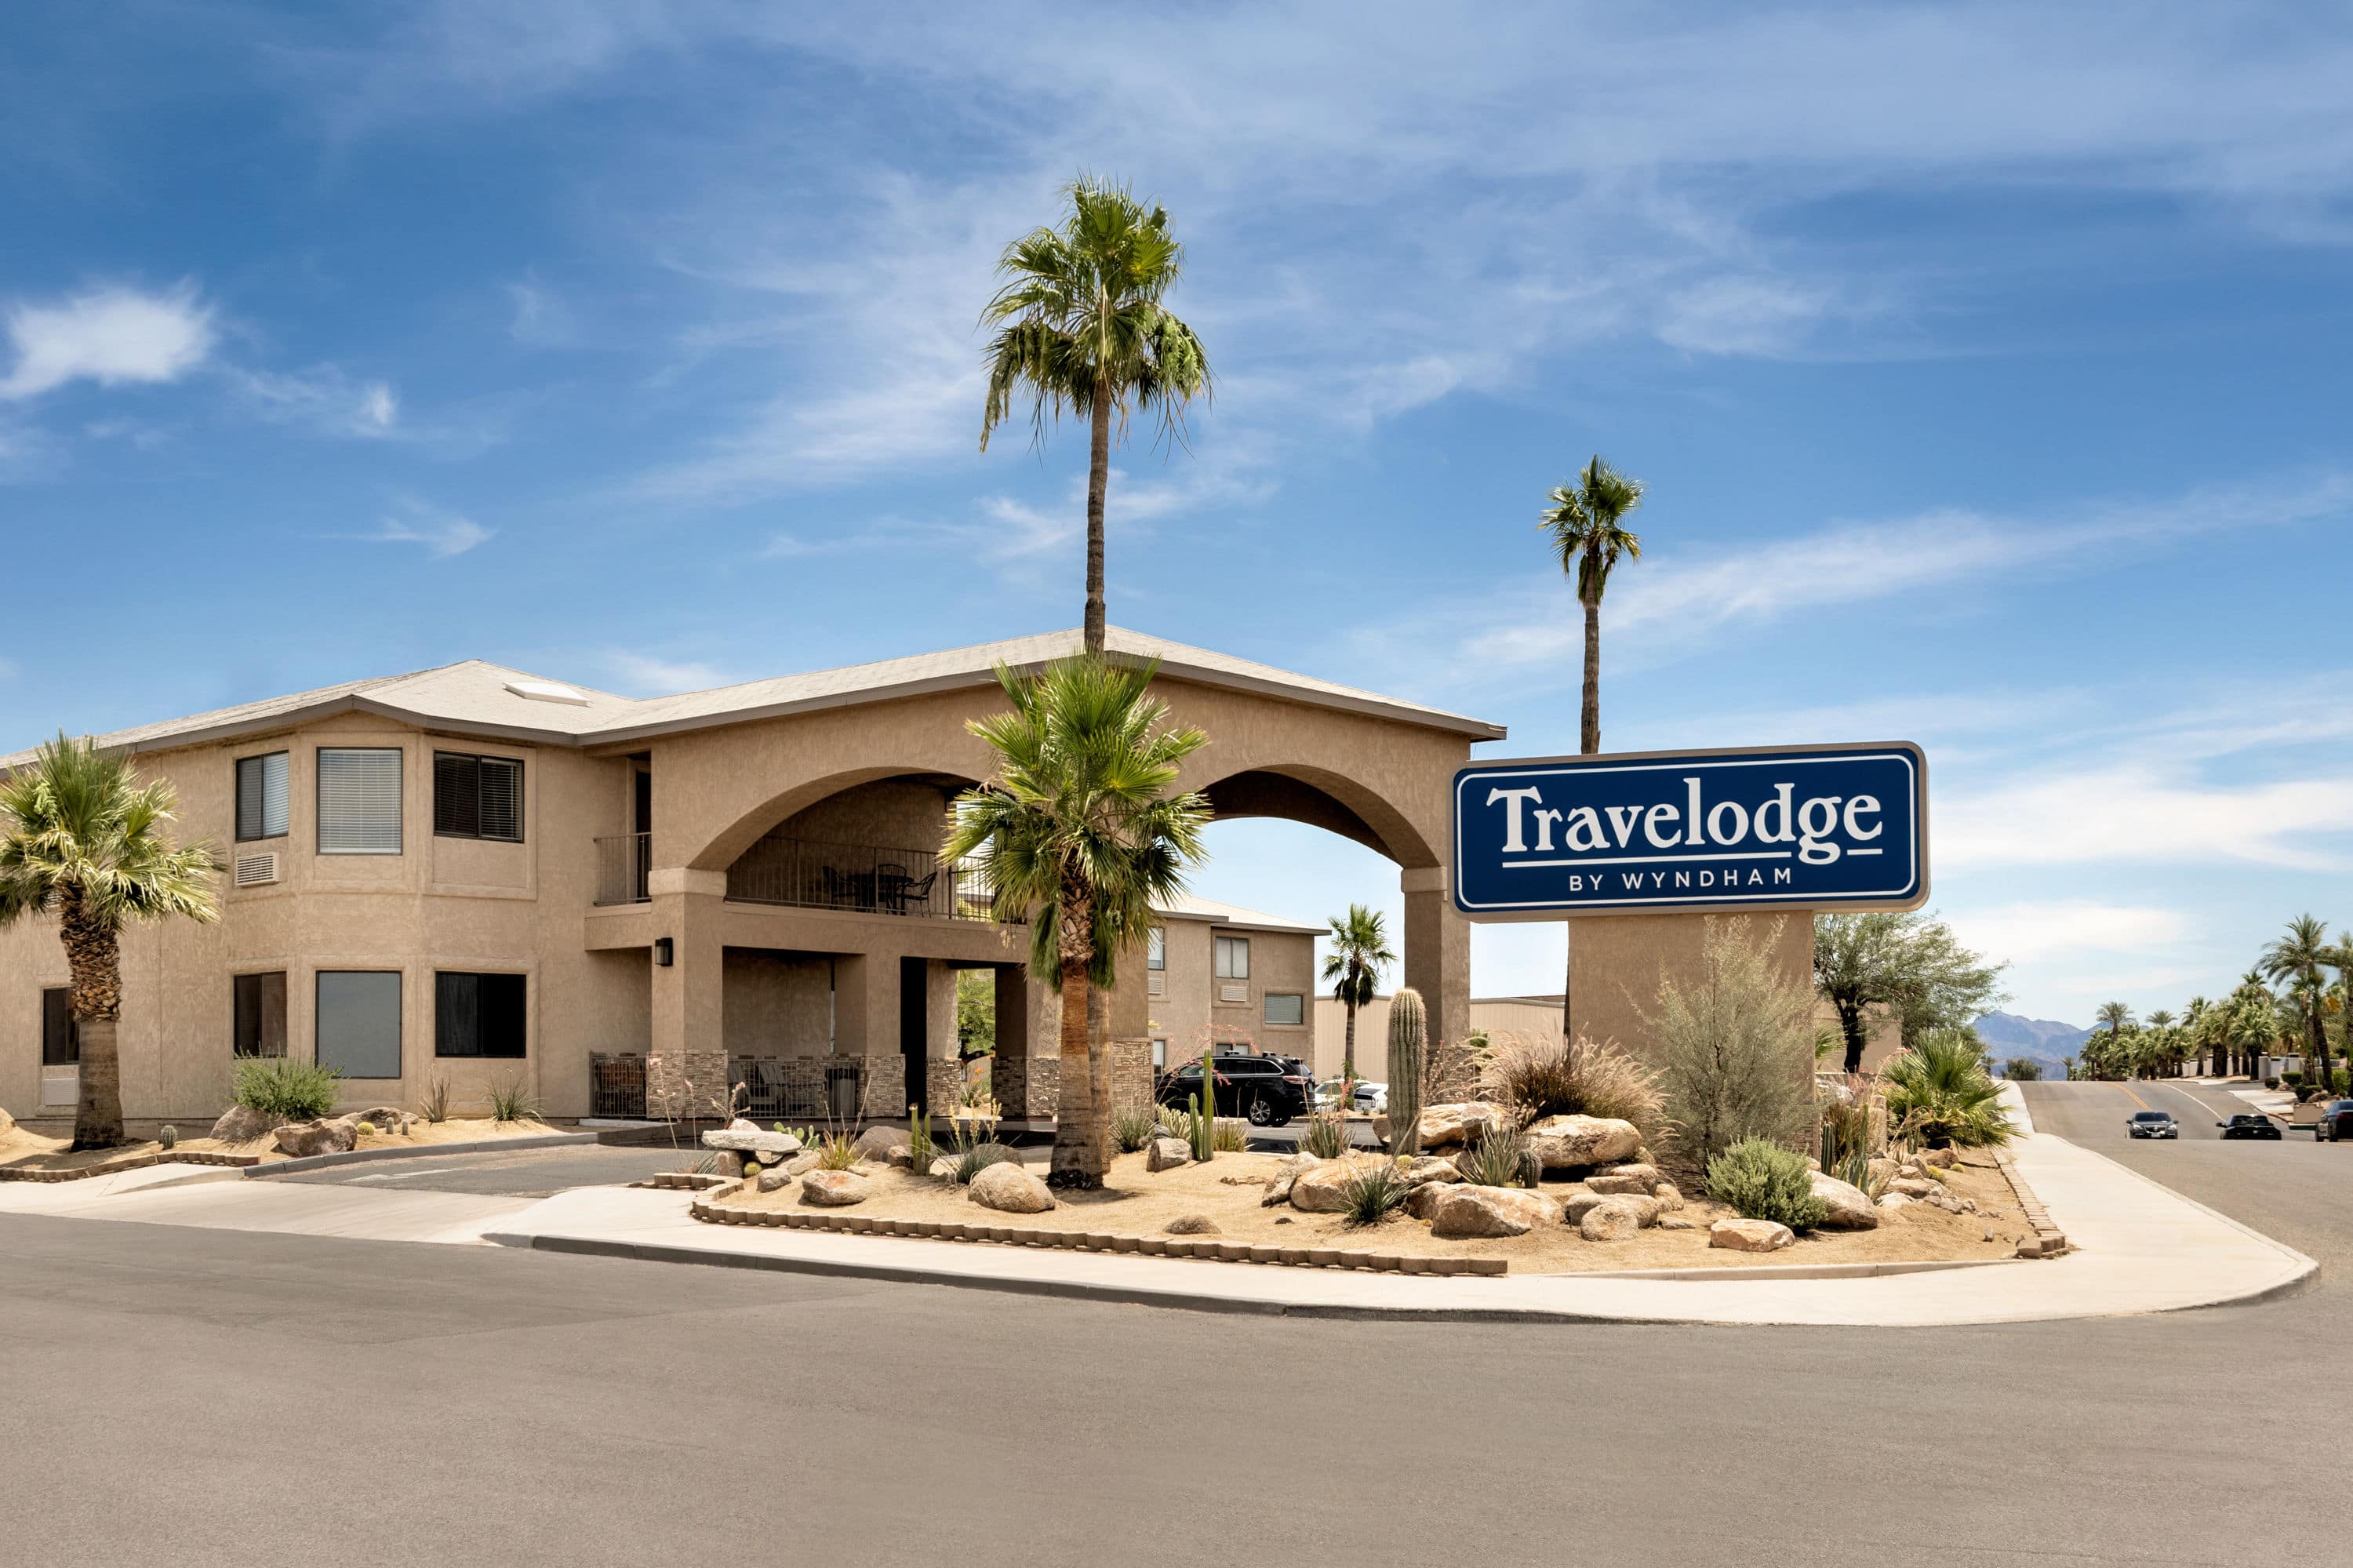 Travelodge Hotels: 13 Locations [2023]